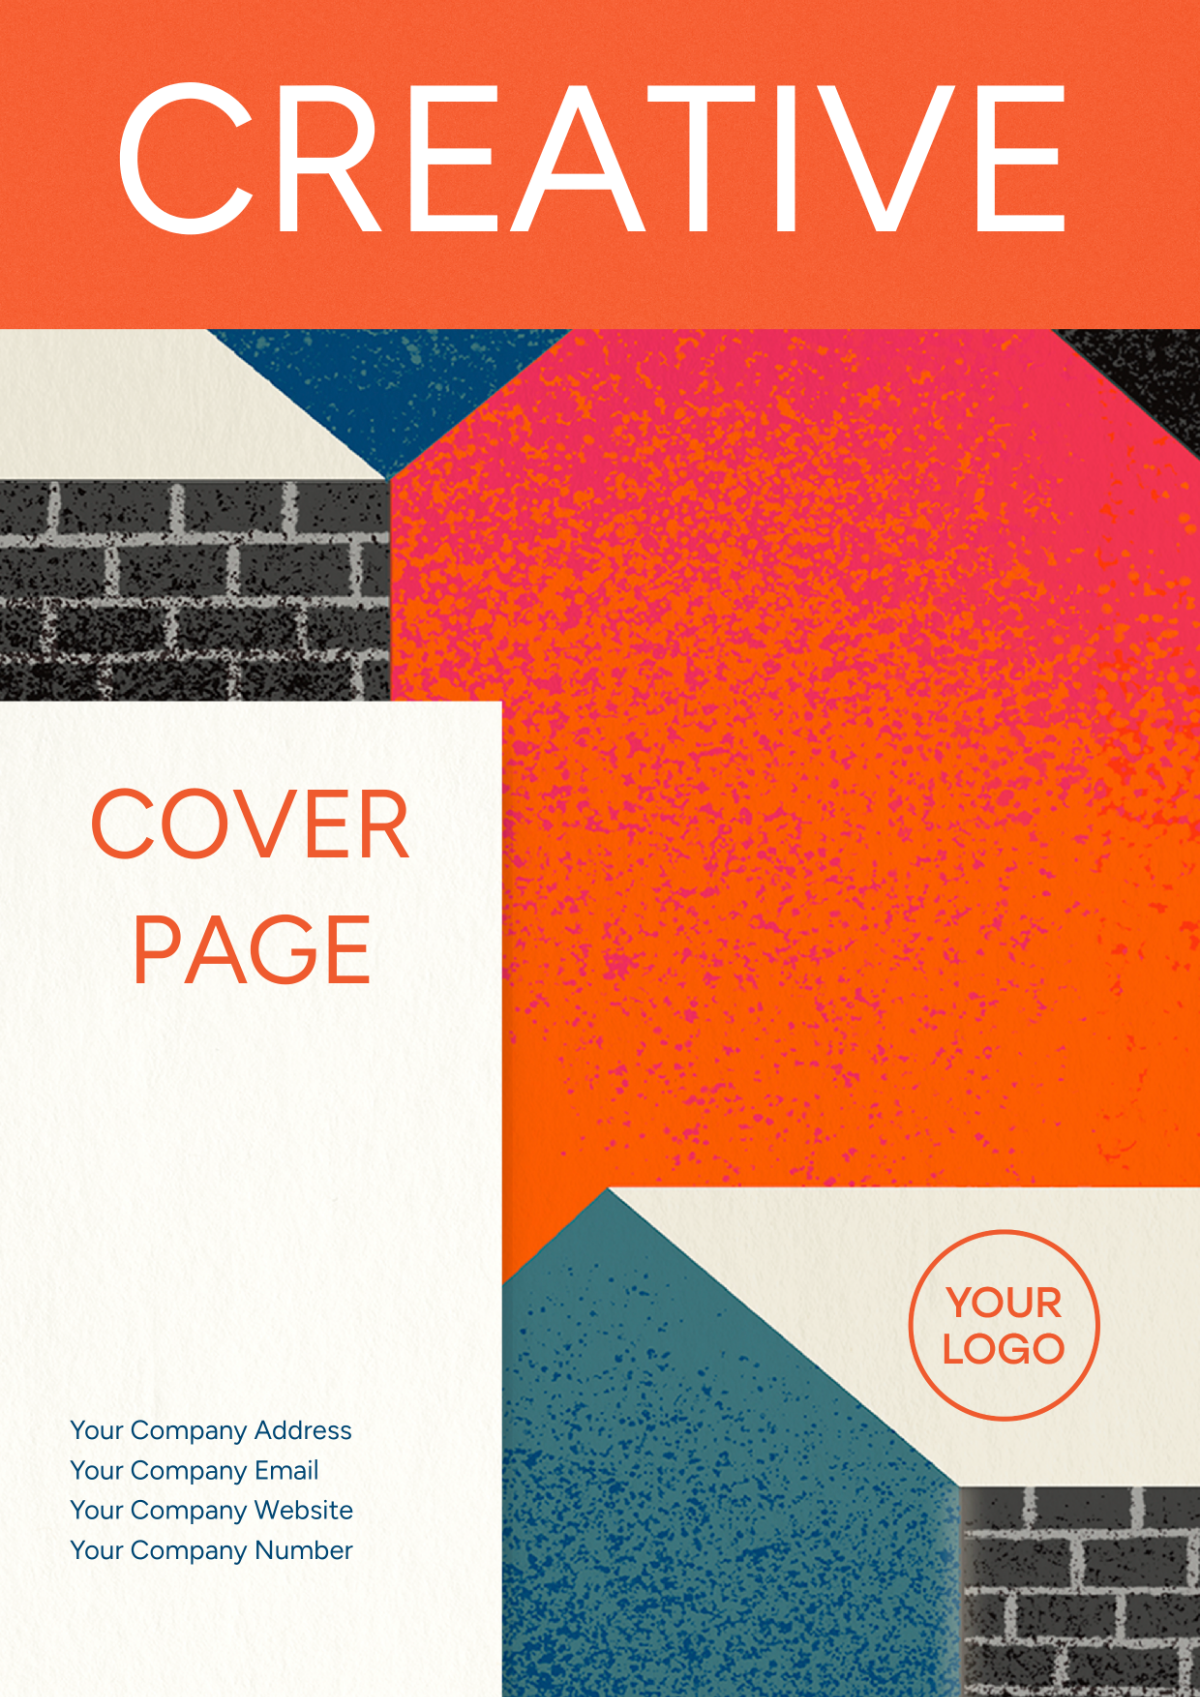 Creative Cover Page Image